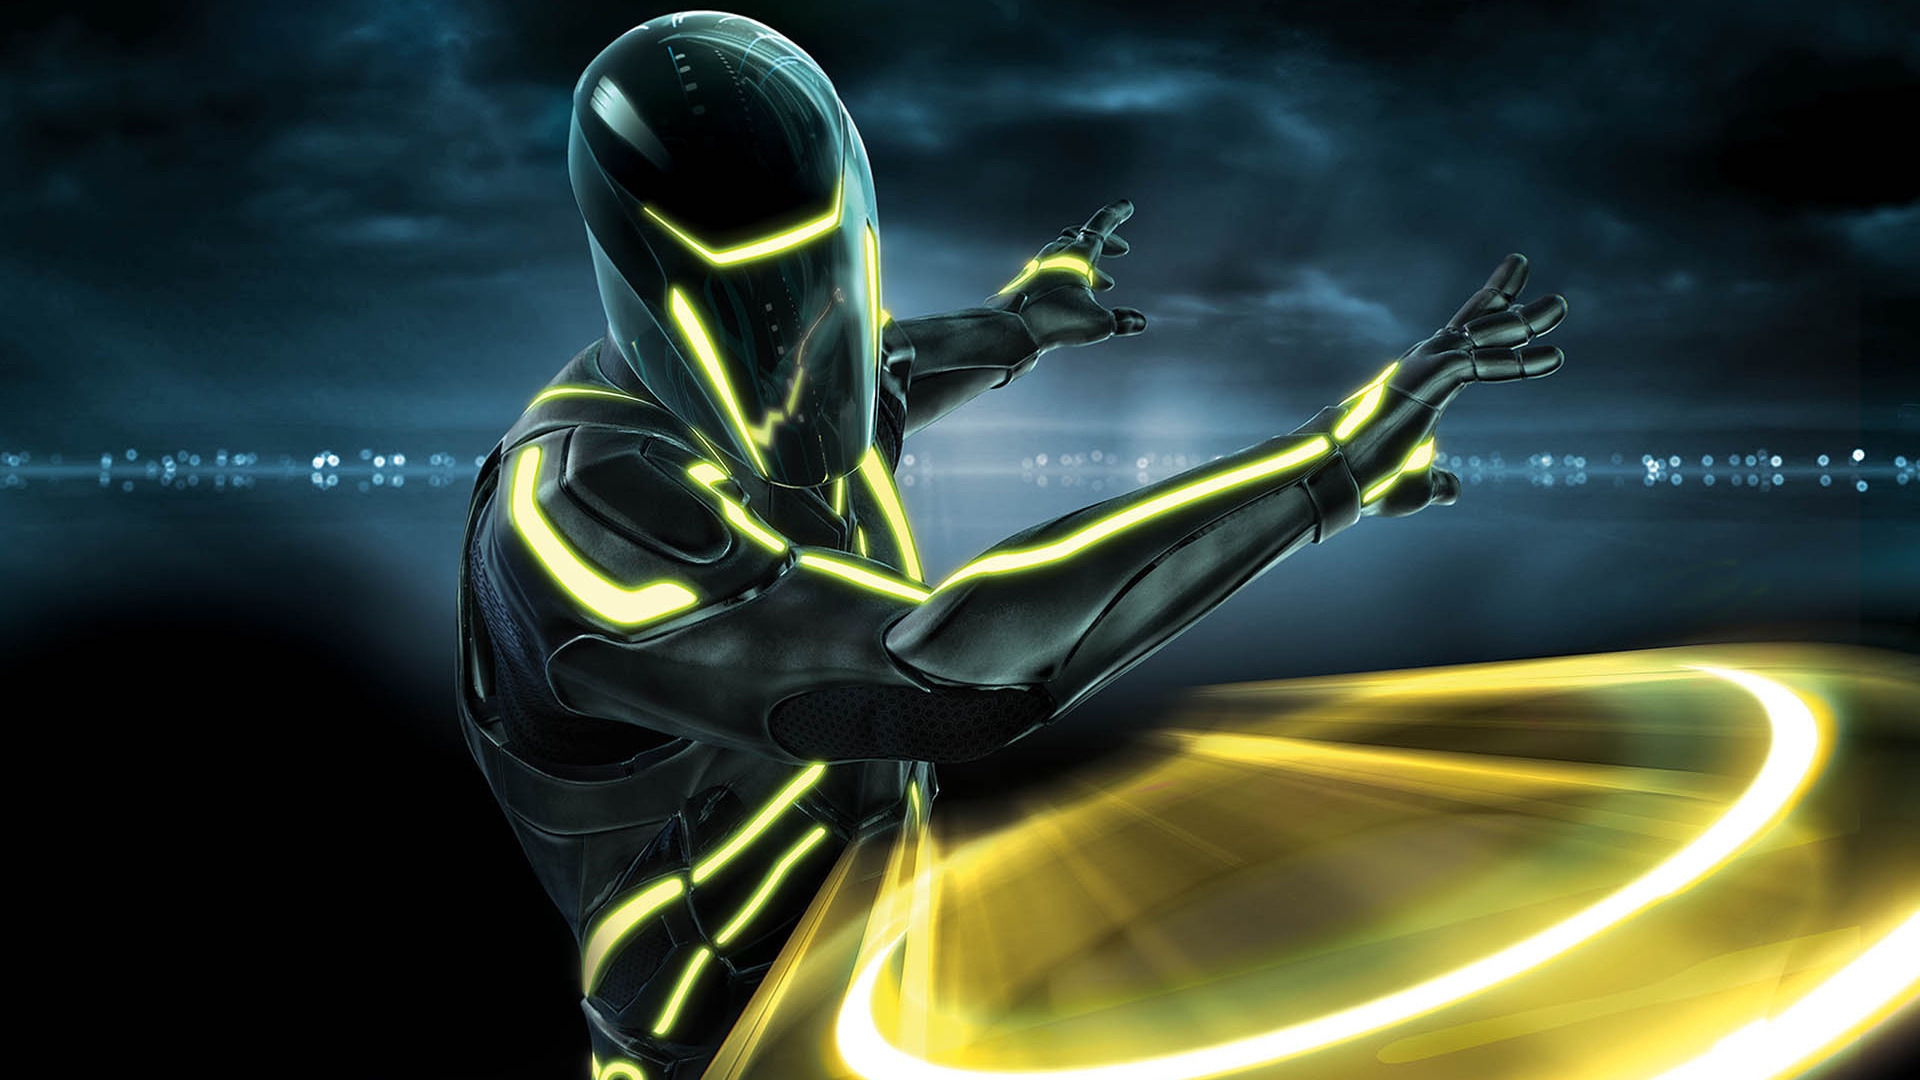 Tron Legacy Clu for 1920 x 1080 HDTV 1080p resolution